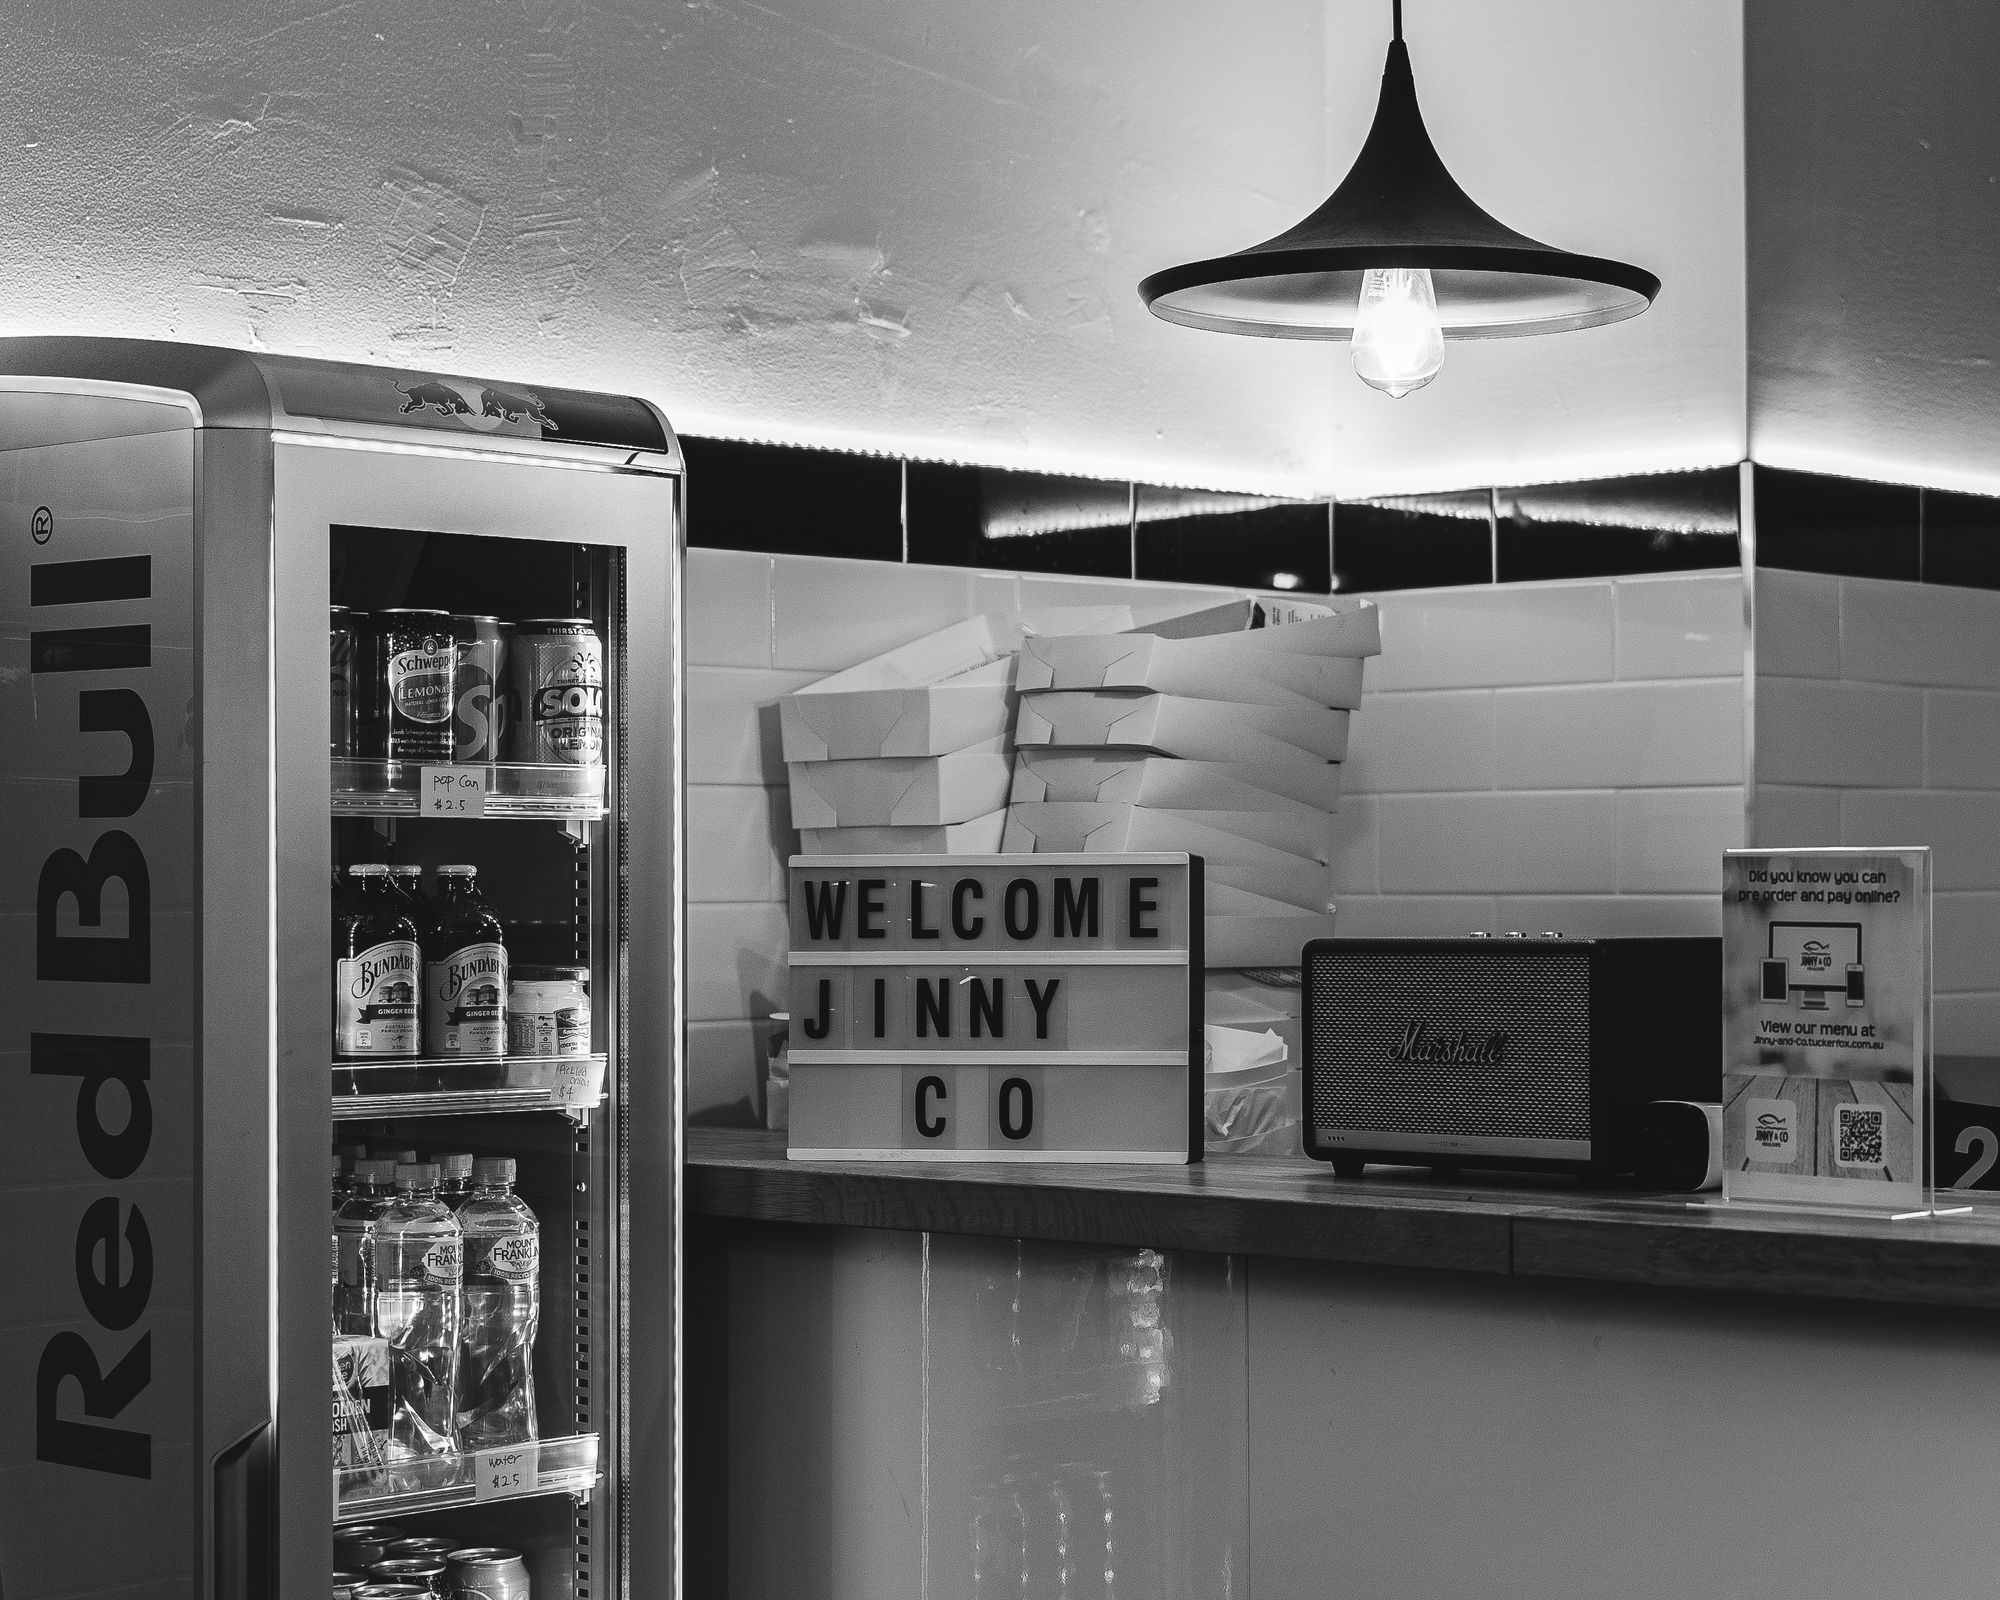 Black and white photo showing a sign that says "Welcome Jinny Co"